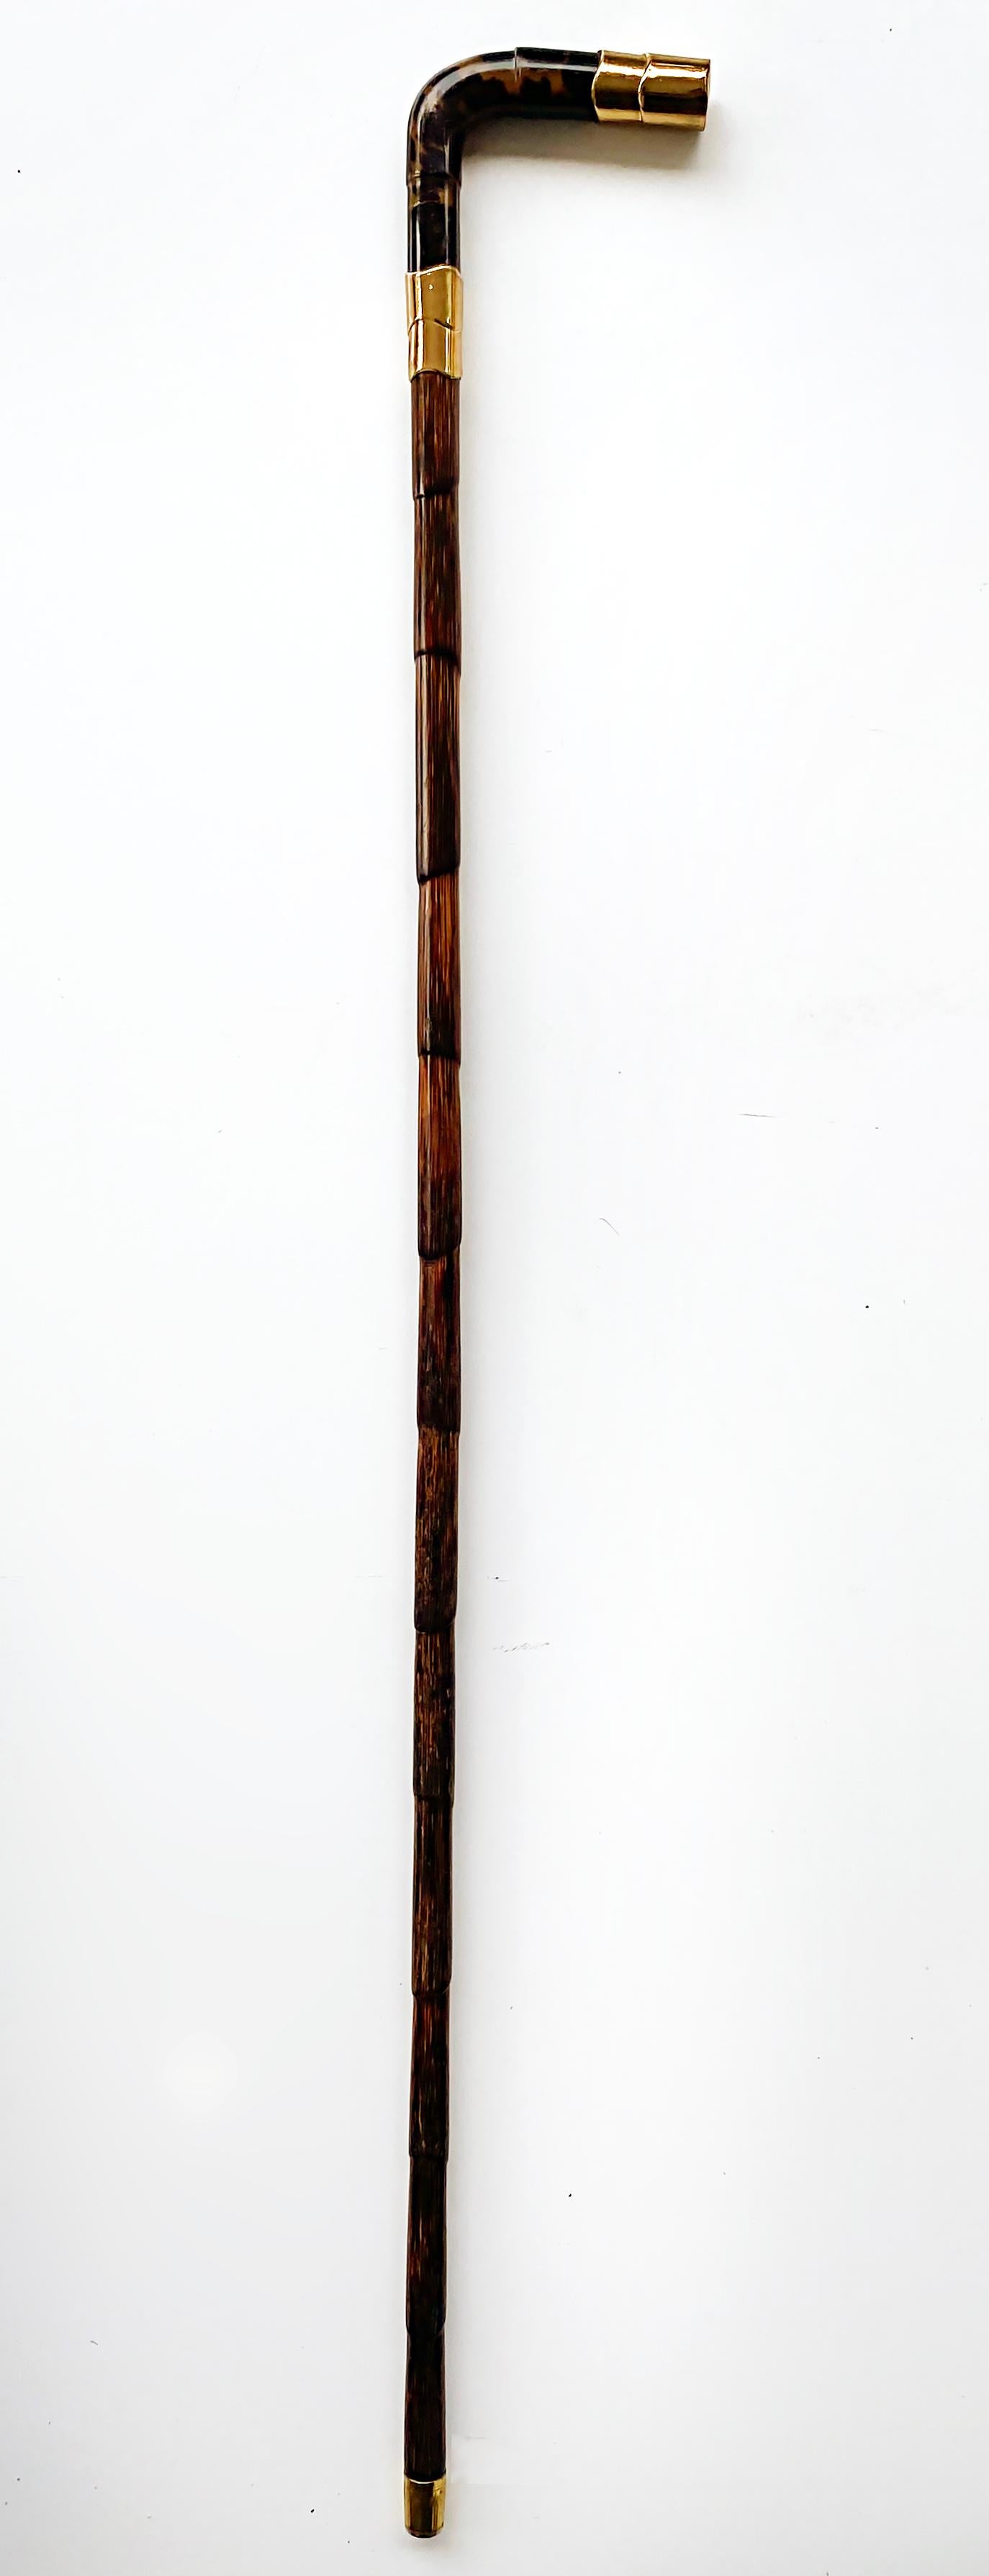 20th Century Gold Plated Rattan Walking Stick, Shell Handle and Bamboo Stick

Offered for sale is an early 20th-century rattan or bamboo walking stick with gold-plated accent trim pieces. The handle end and the stick end have gold-plated fittings